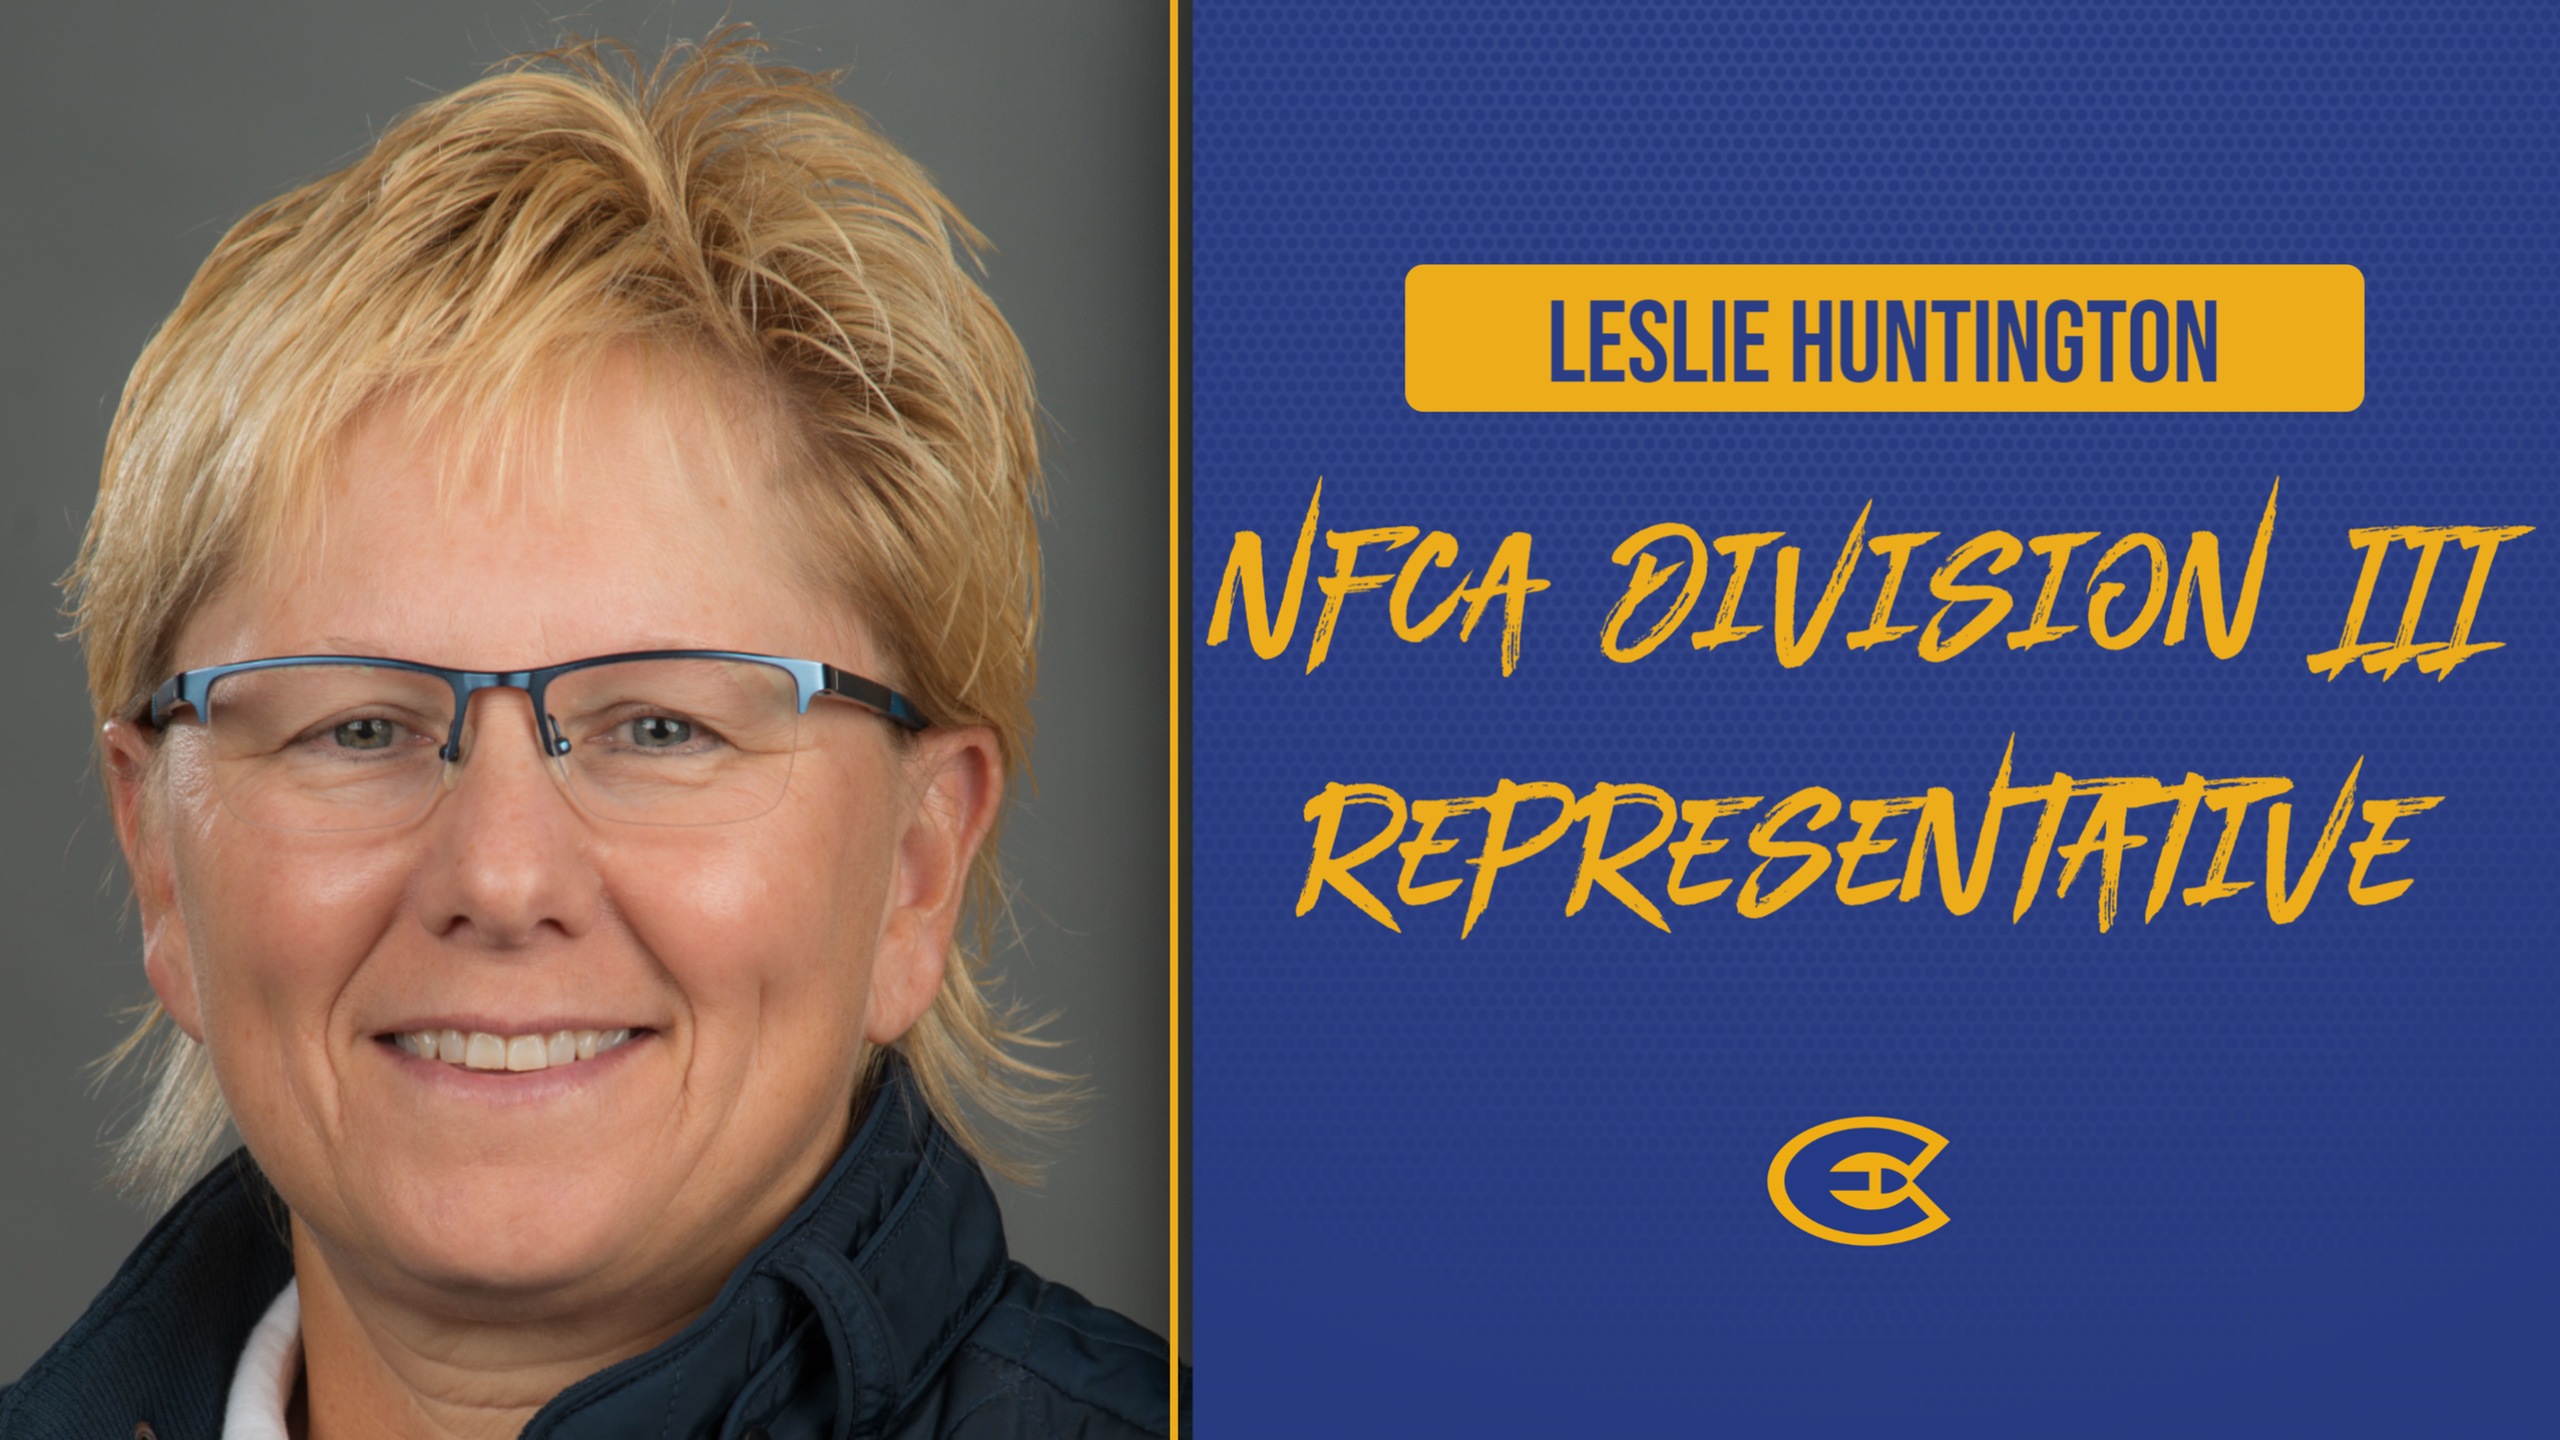 Huntington Elected to NFCA Board as DIII Rep